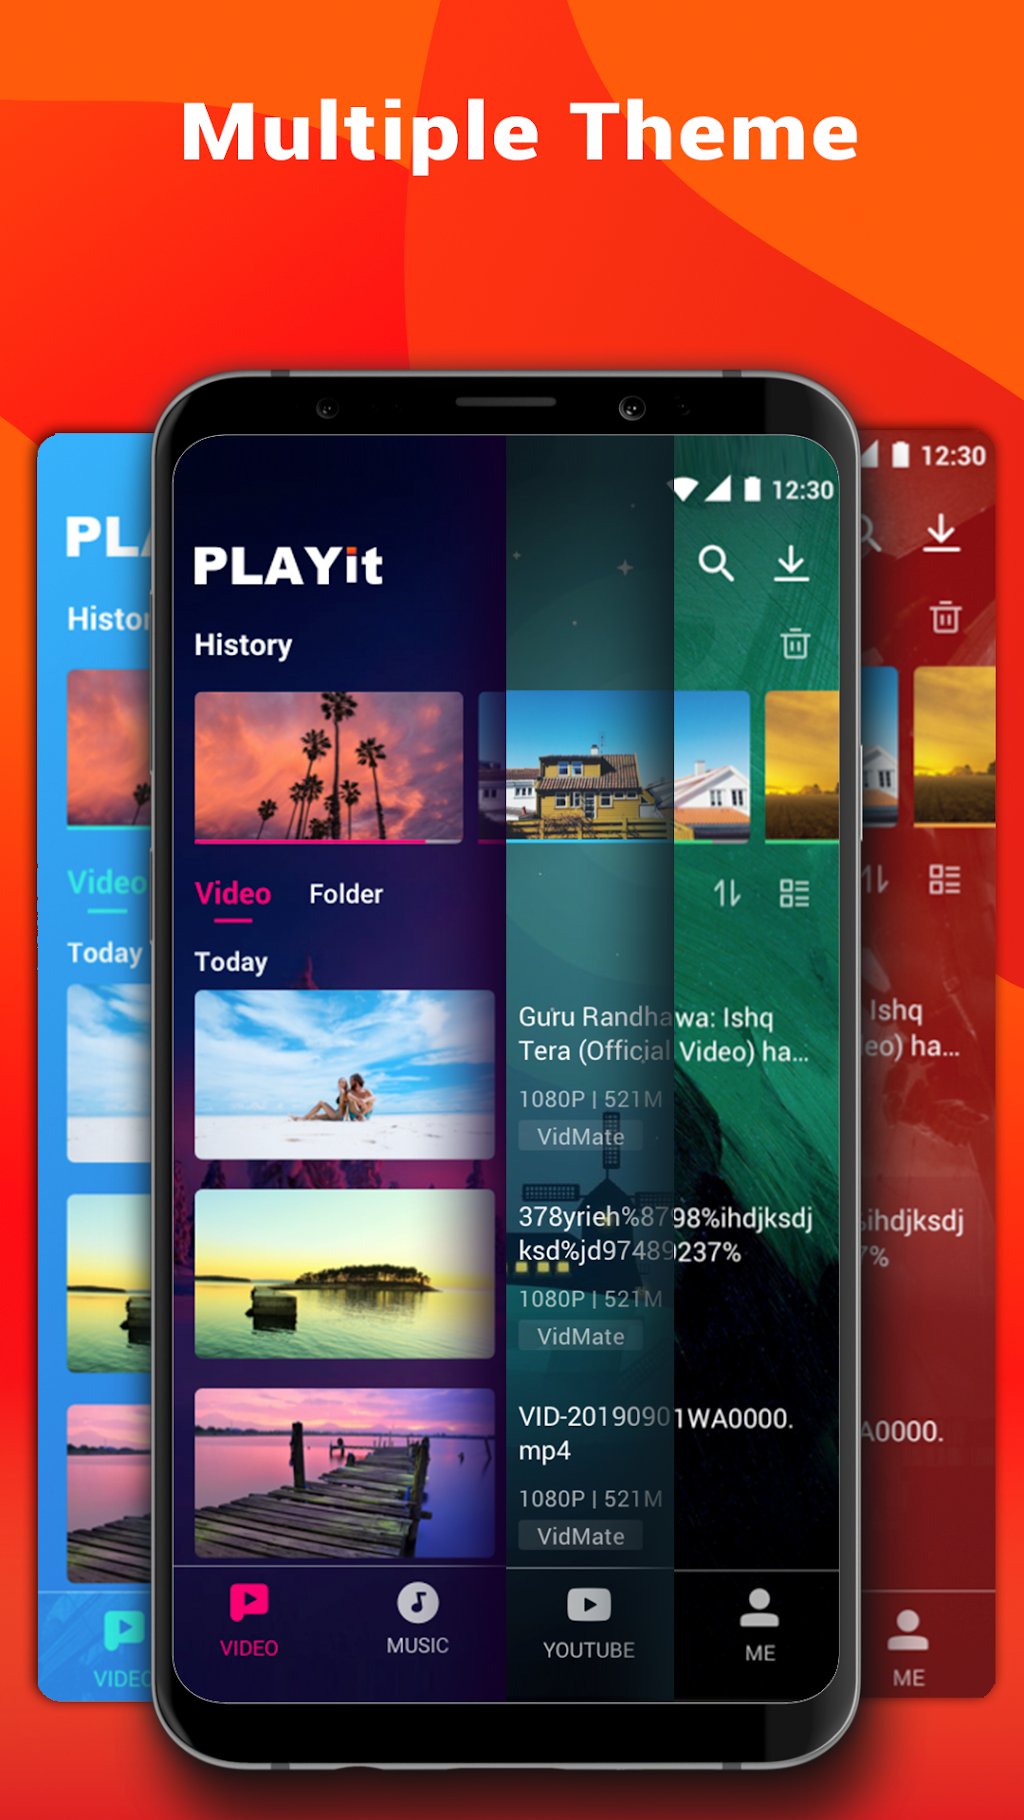 PLAYit-A-New-All-in-One-Video-Player.4.jpg